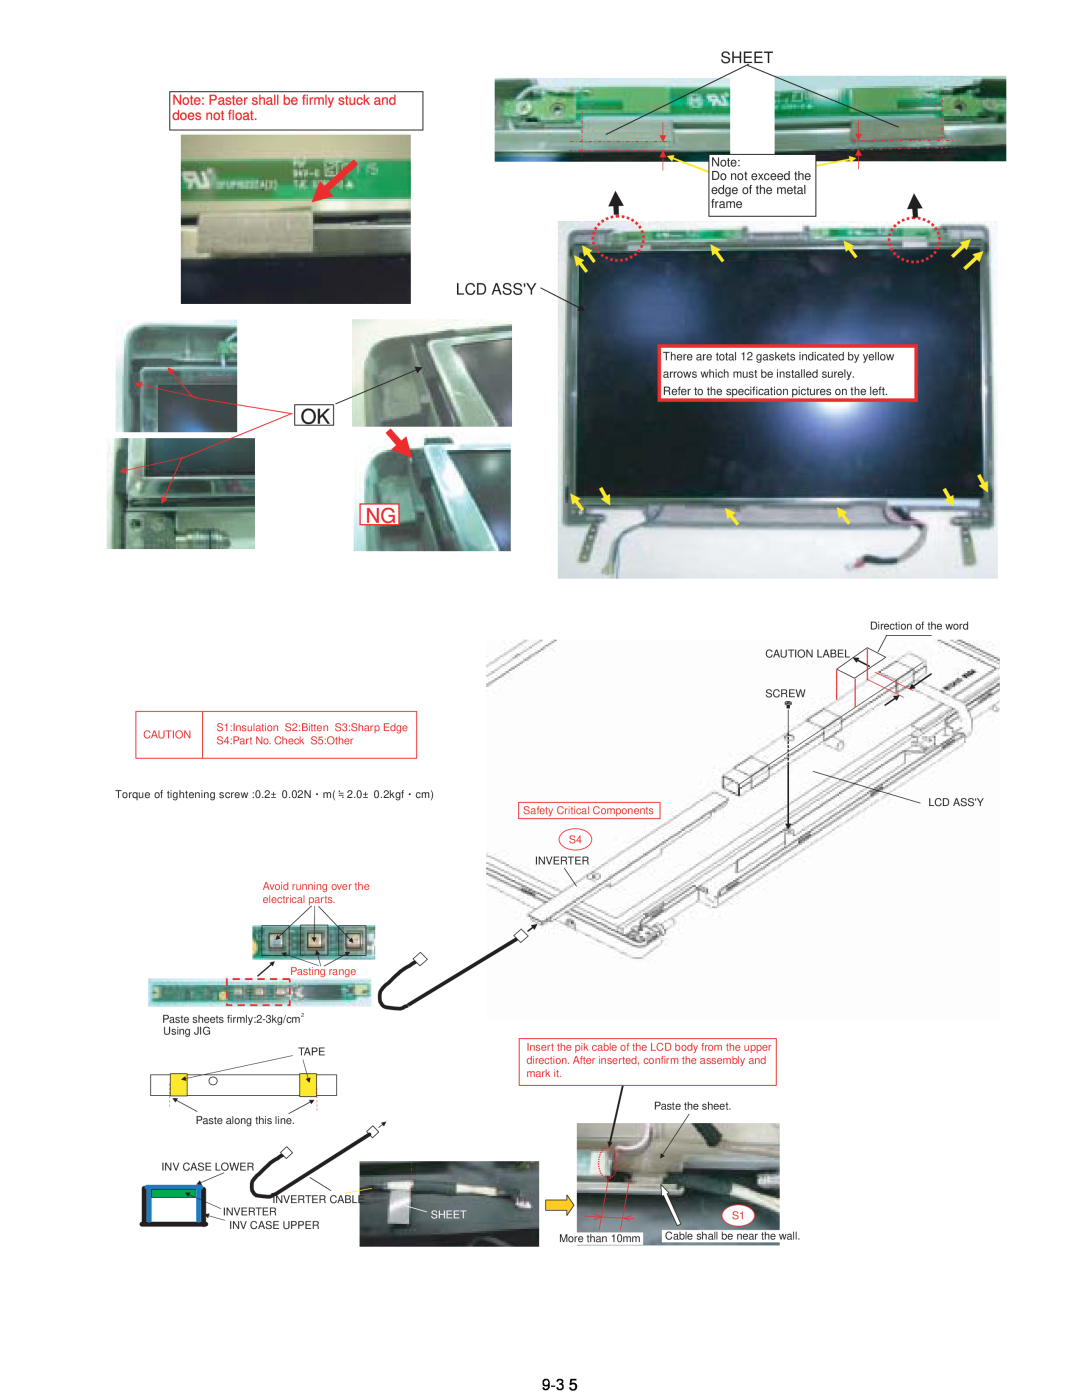 Panasonic CF-52EKM 1 D 2 M service manual Sheet, Lcd Assy, Note Paster shall be firmly stuck and does not float 